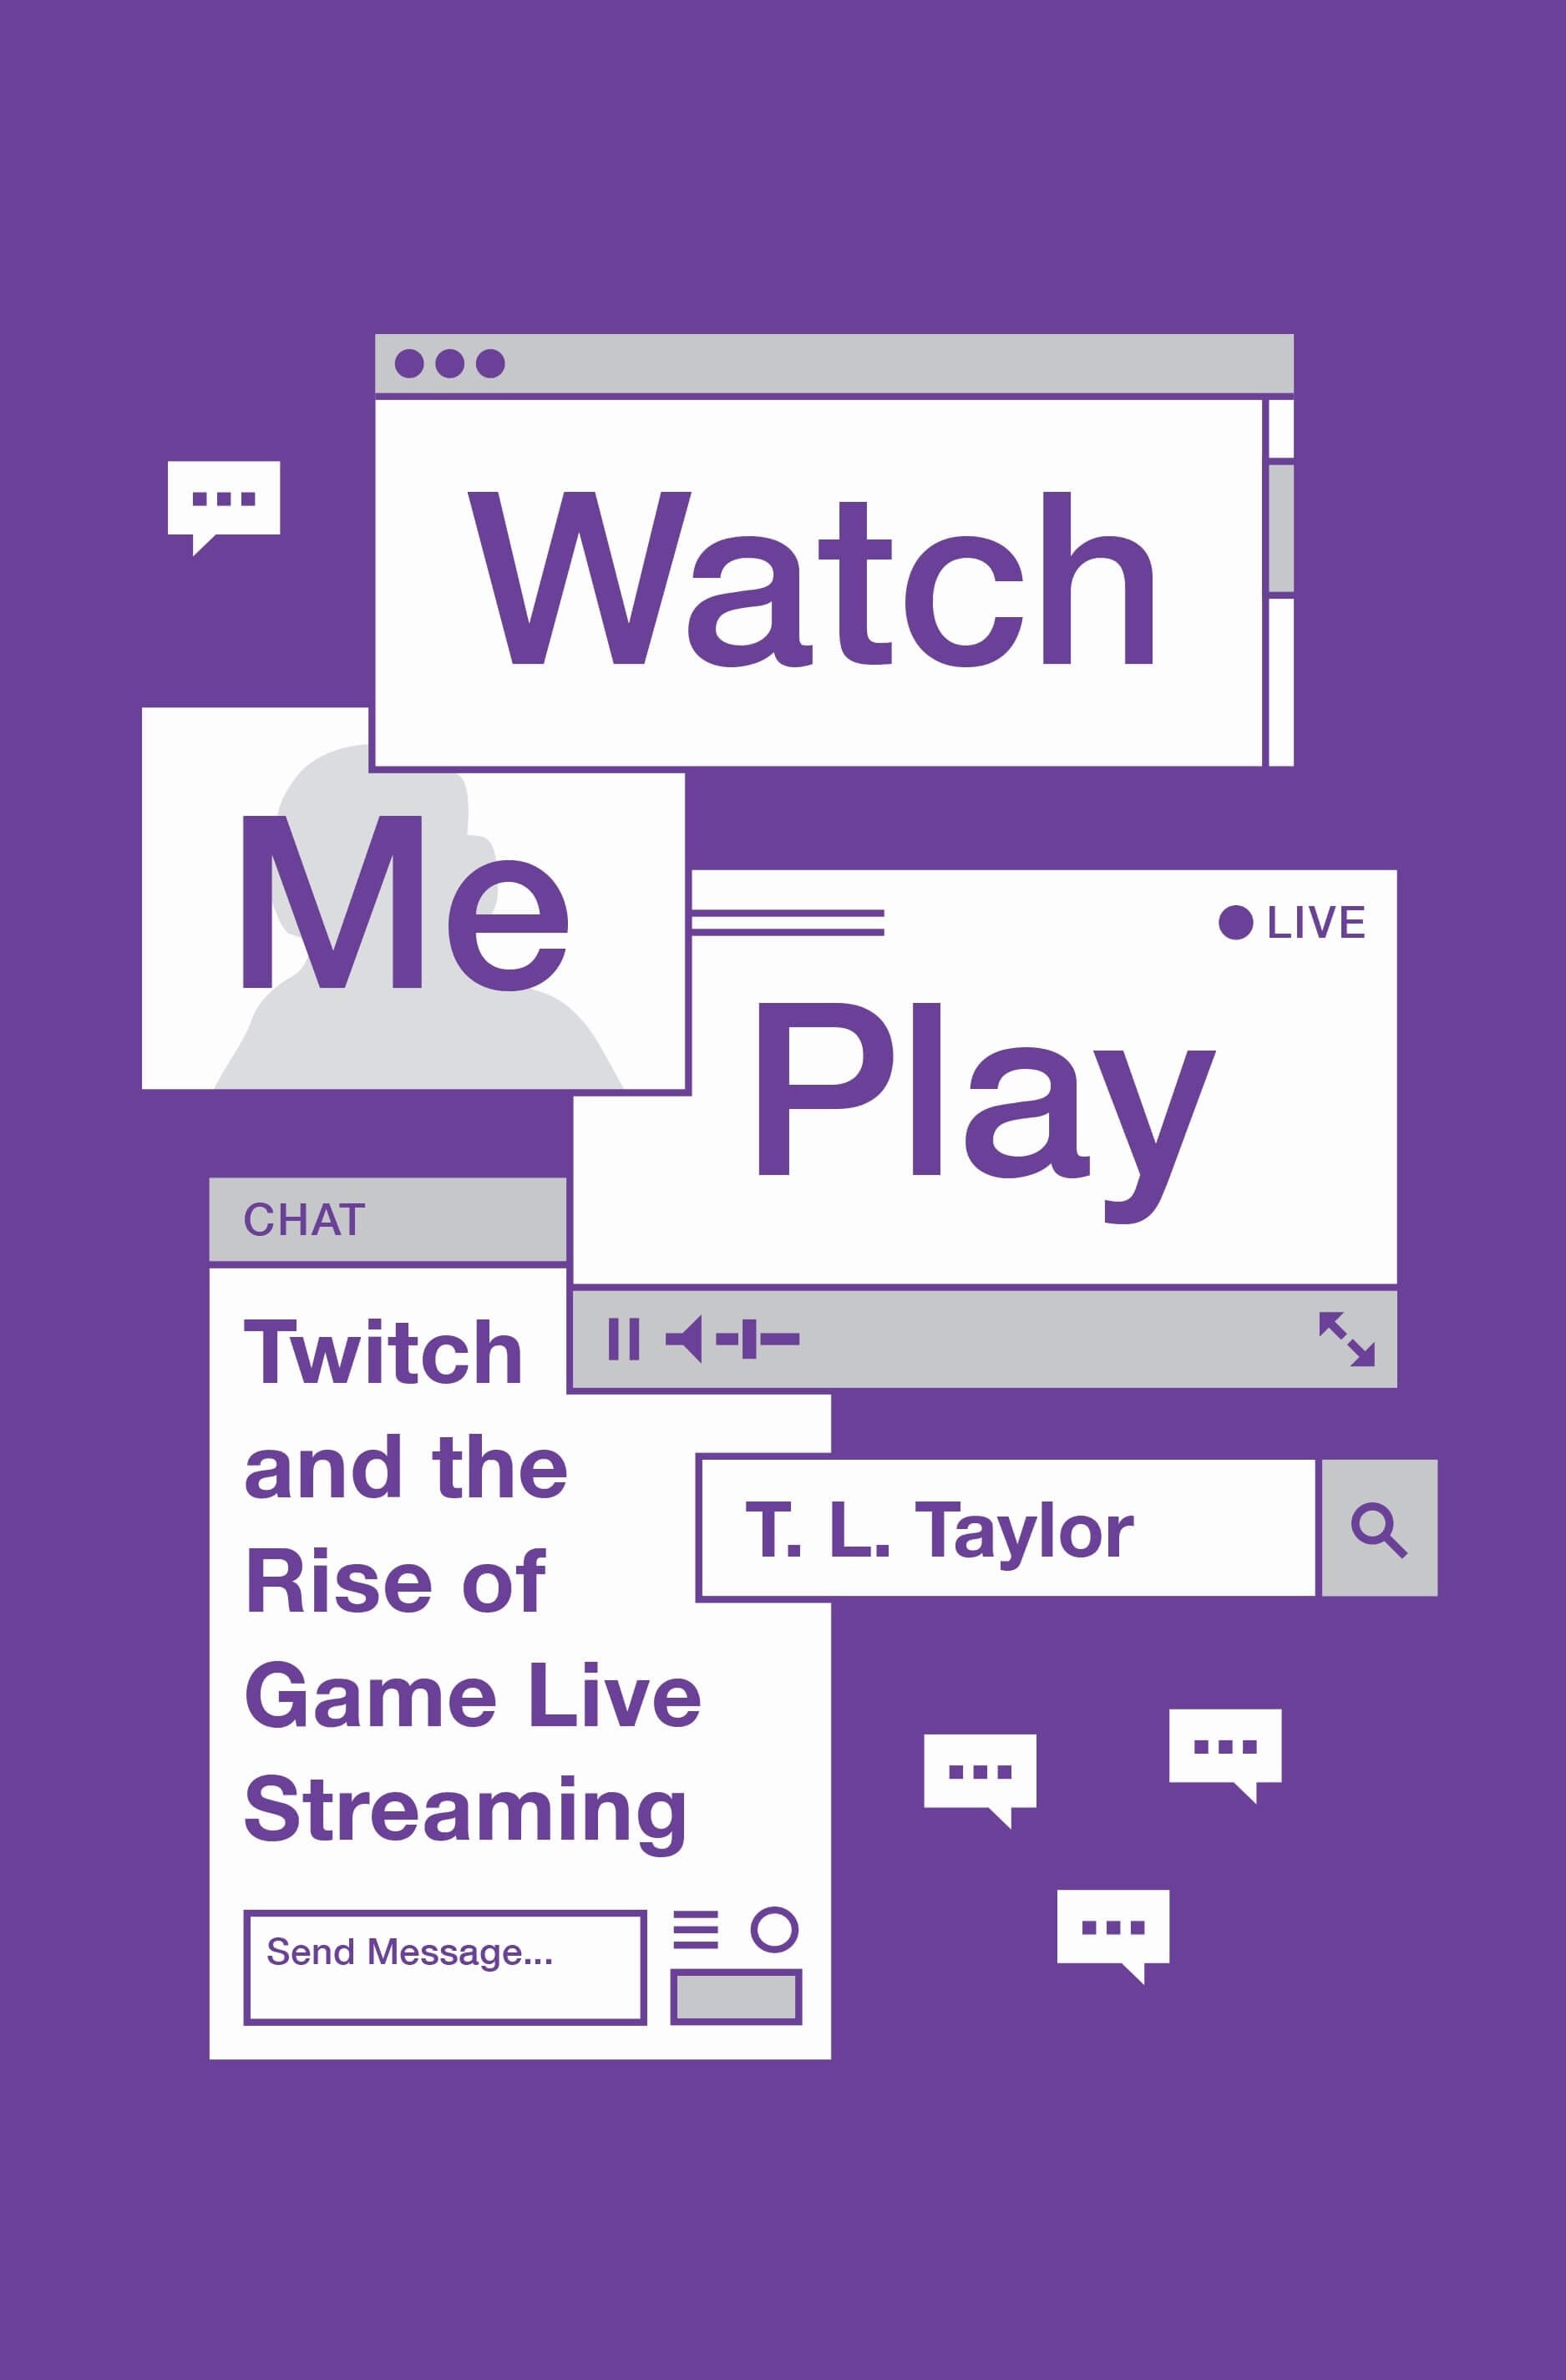 twitch-slang-and-emote-8